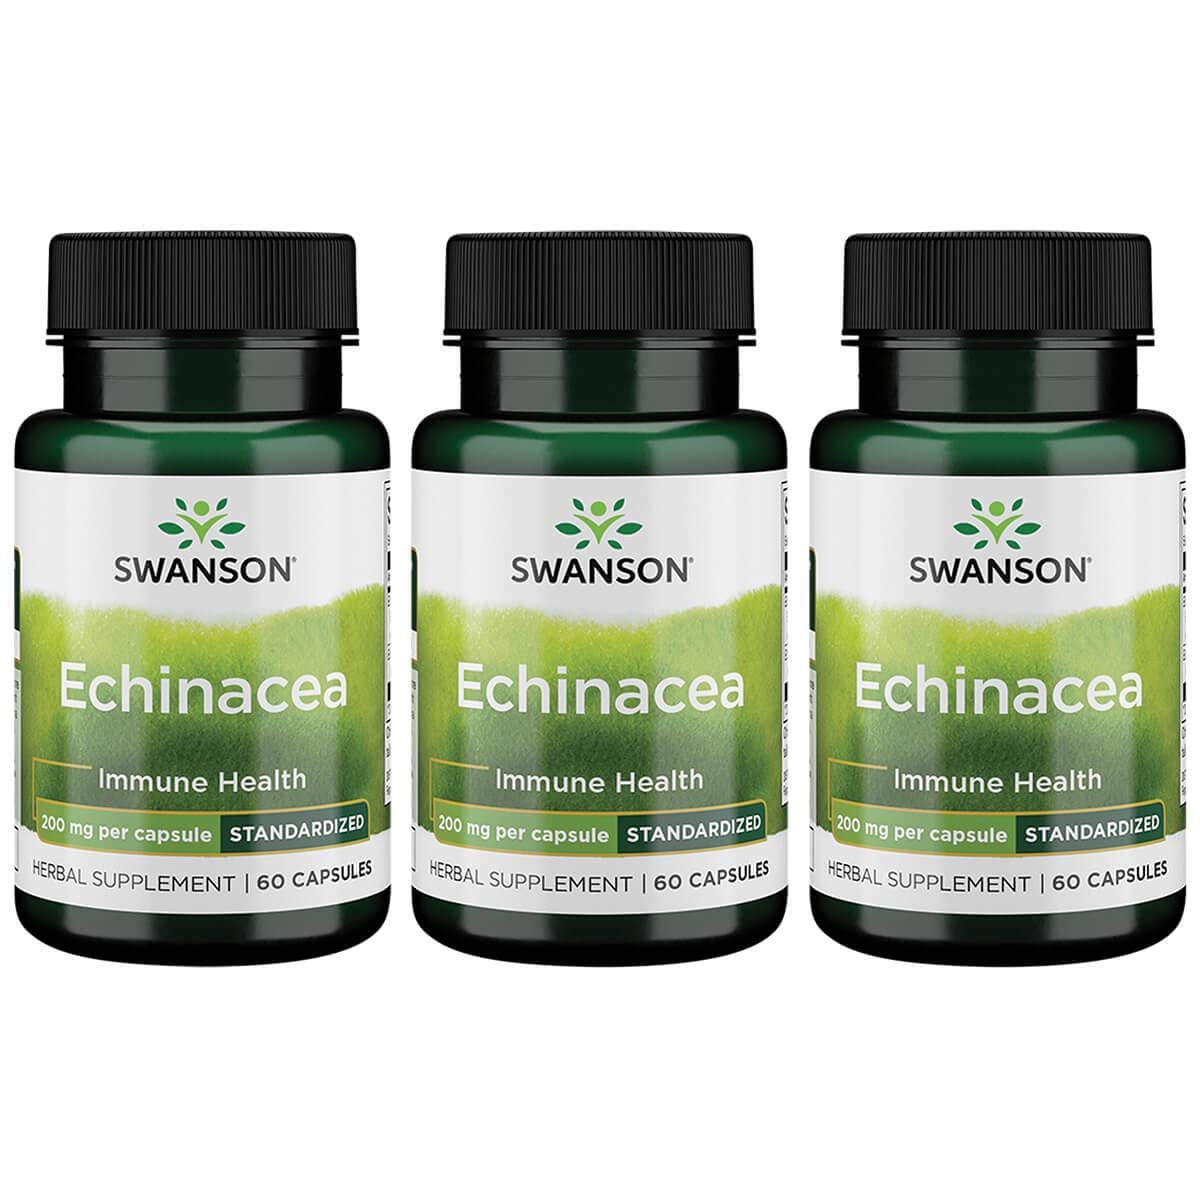 Swanson Superior Herbs Echinacea - Standardized 3 Pack Vitamin 200 mg 60 Caps Herbs and Supplements